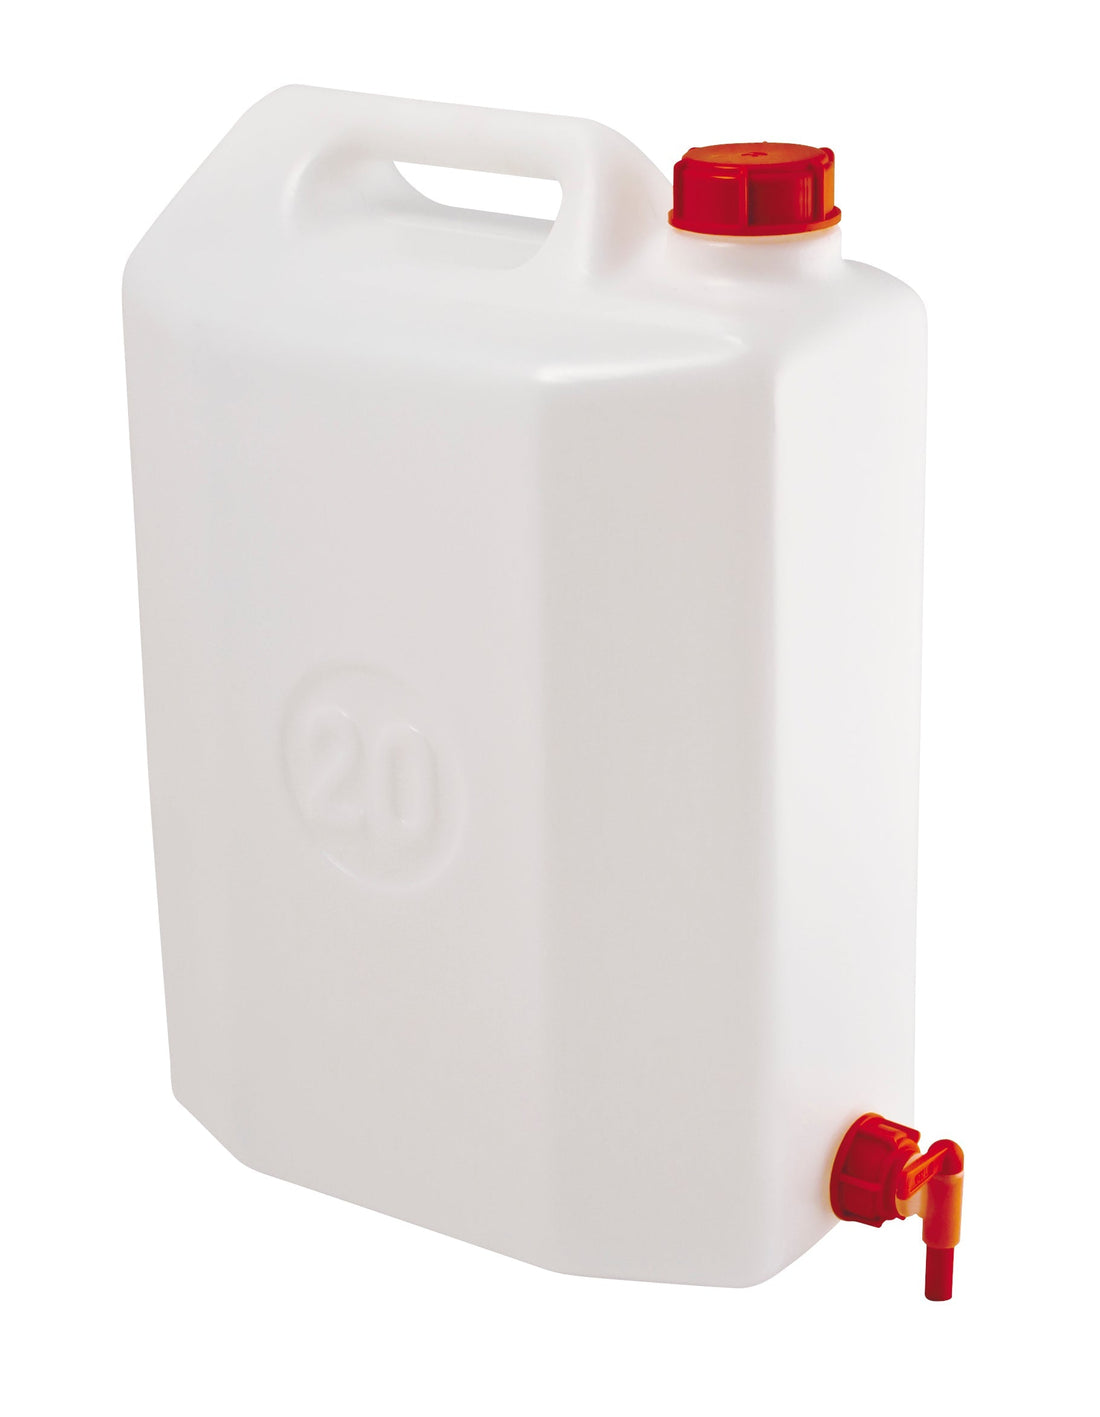 20LT PLASTIC JERRY CAN WITH TAP - best price from Maltashopper.com BR500910067